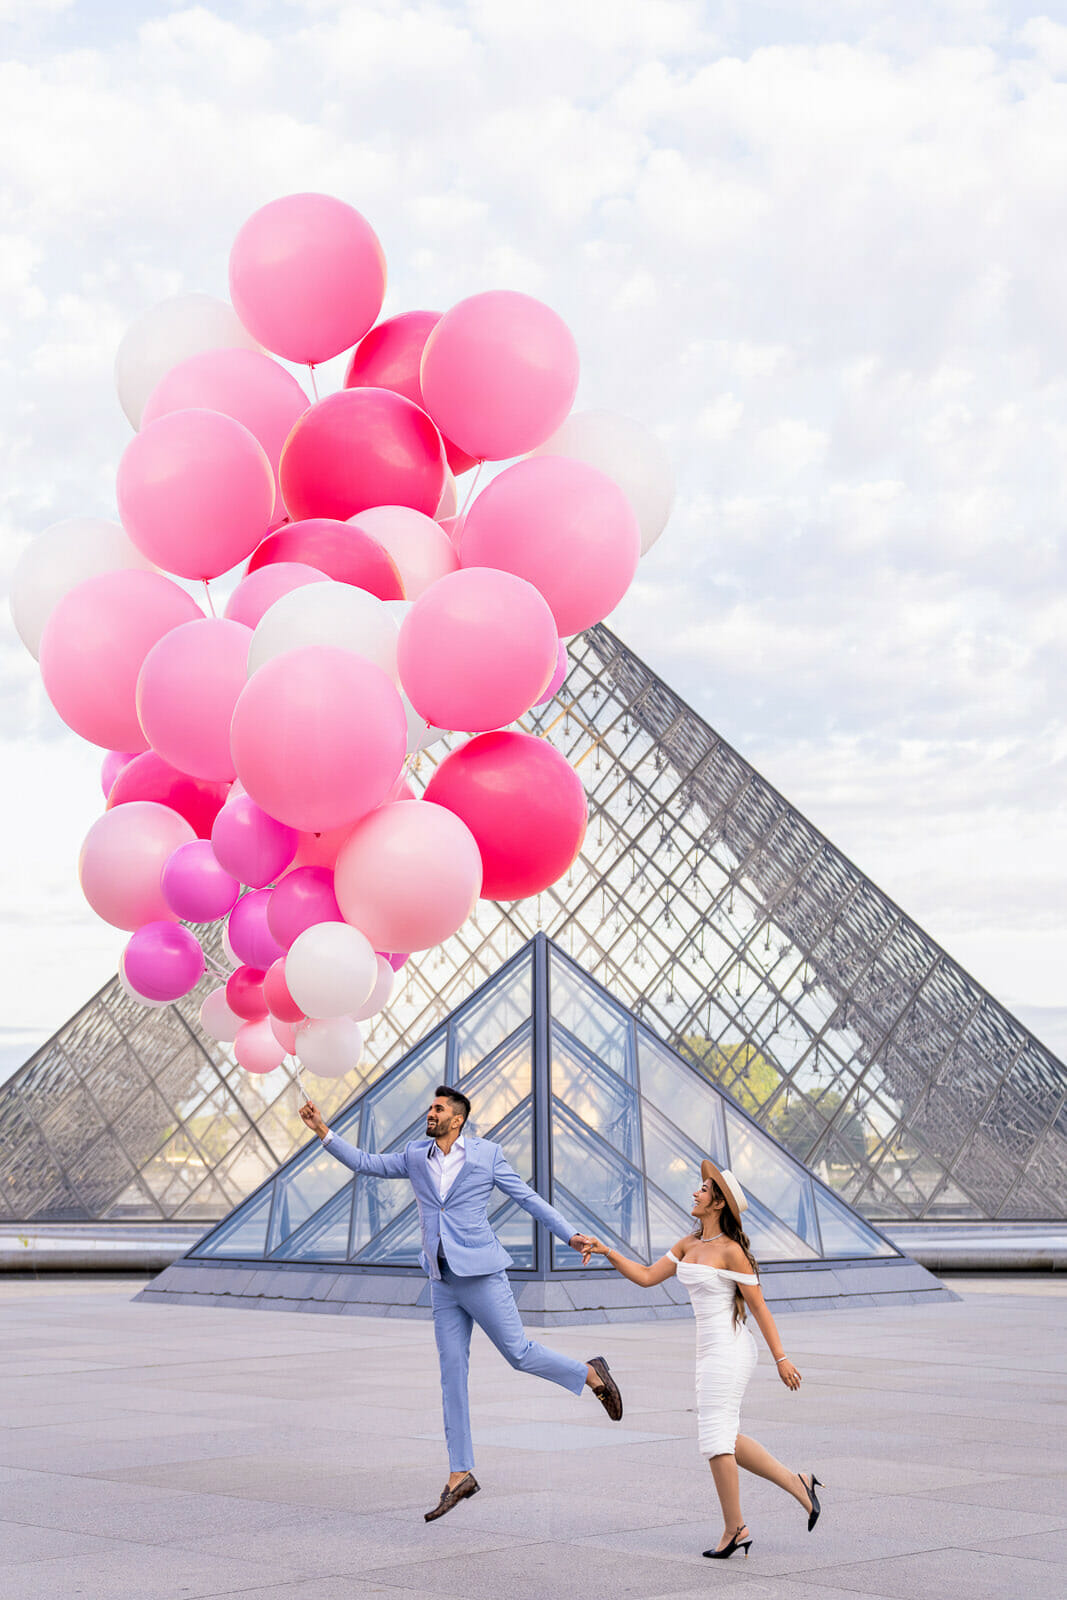 fun Paris engagement photos at the Louvre Museum with massive balloons